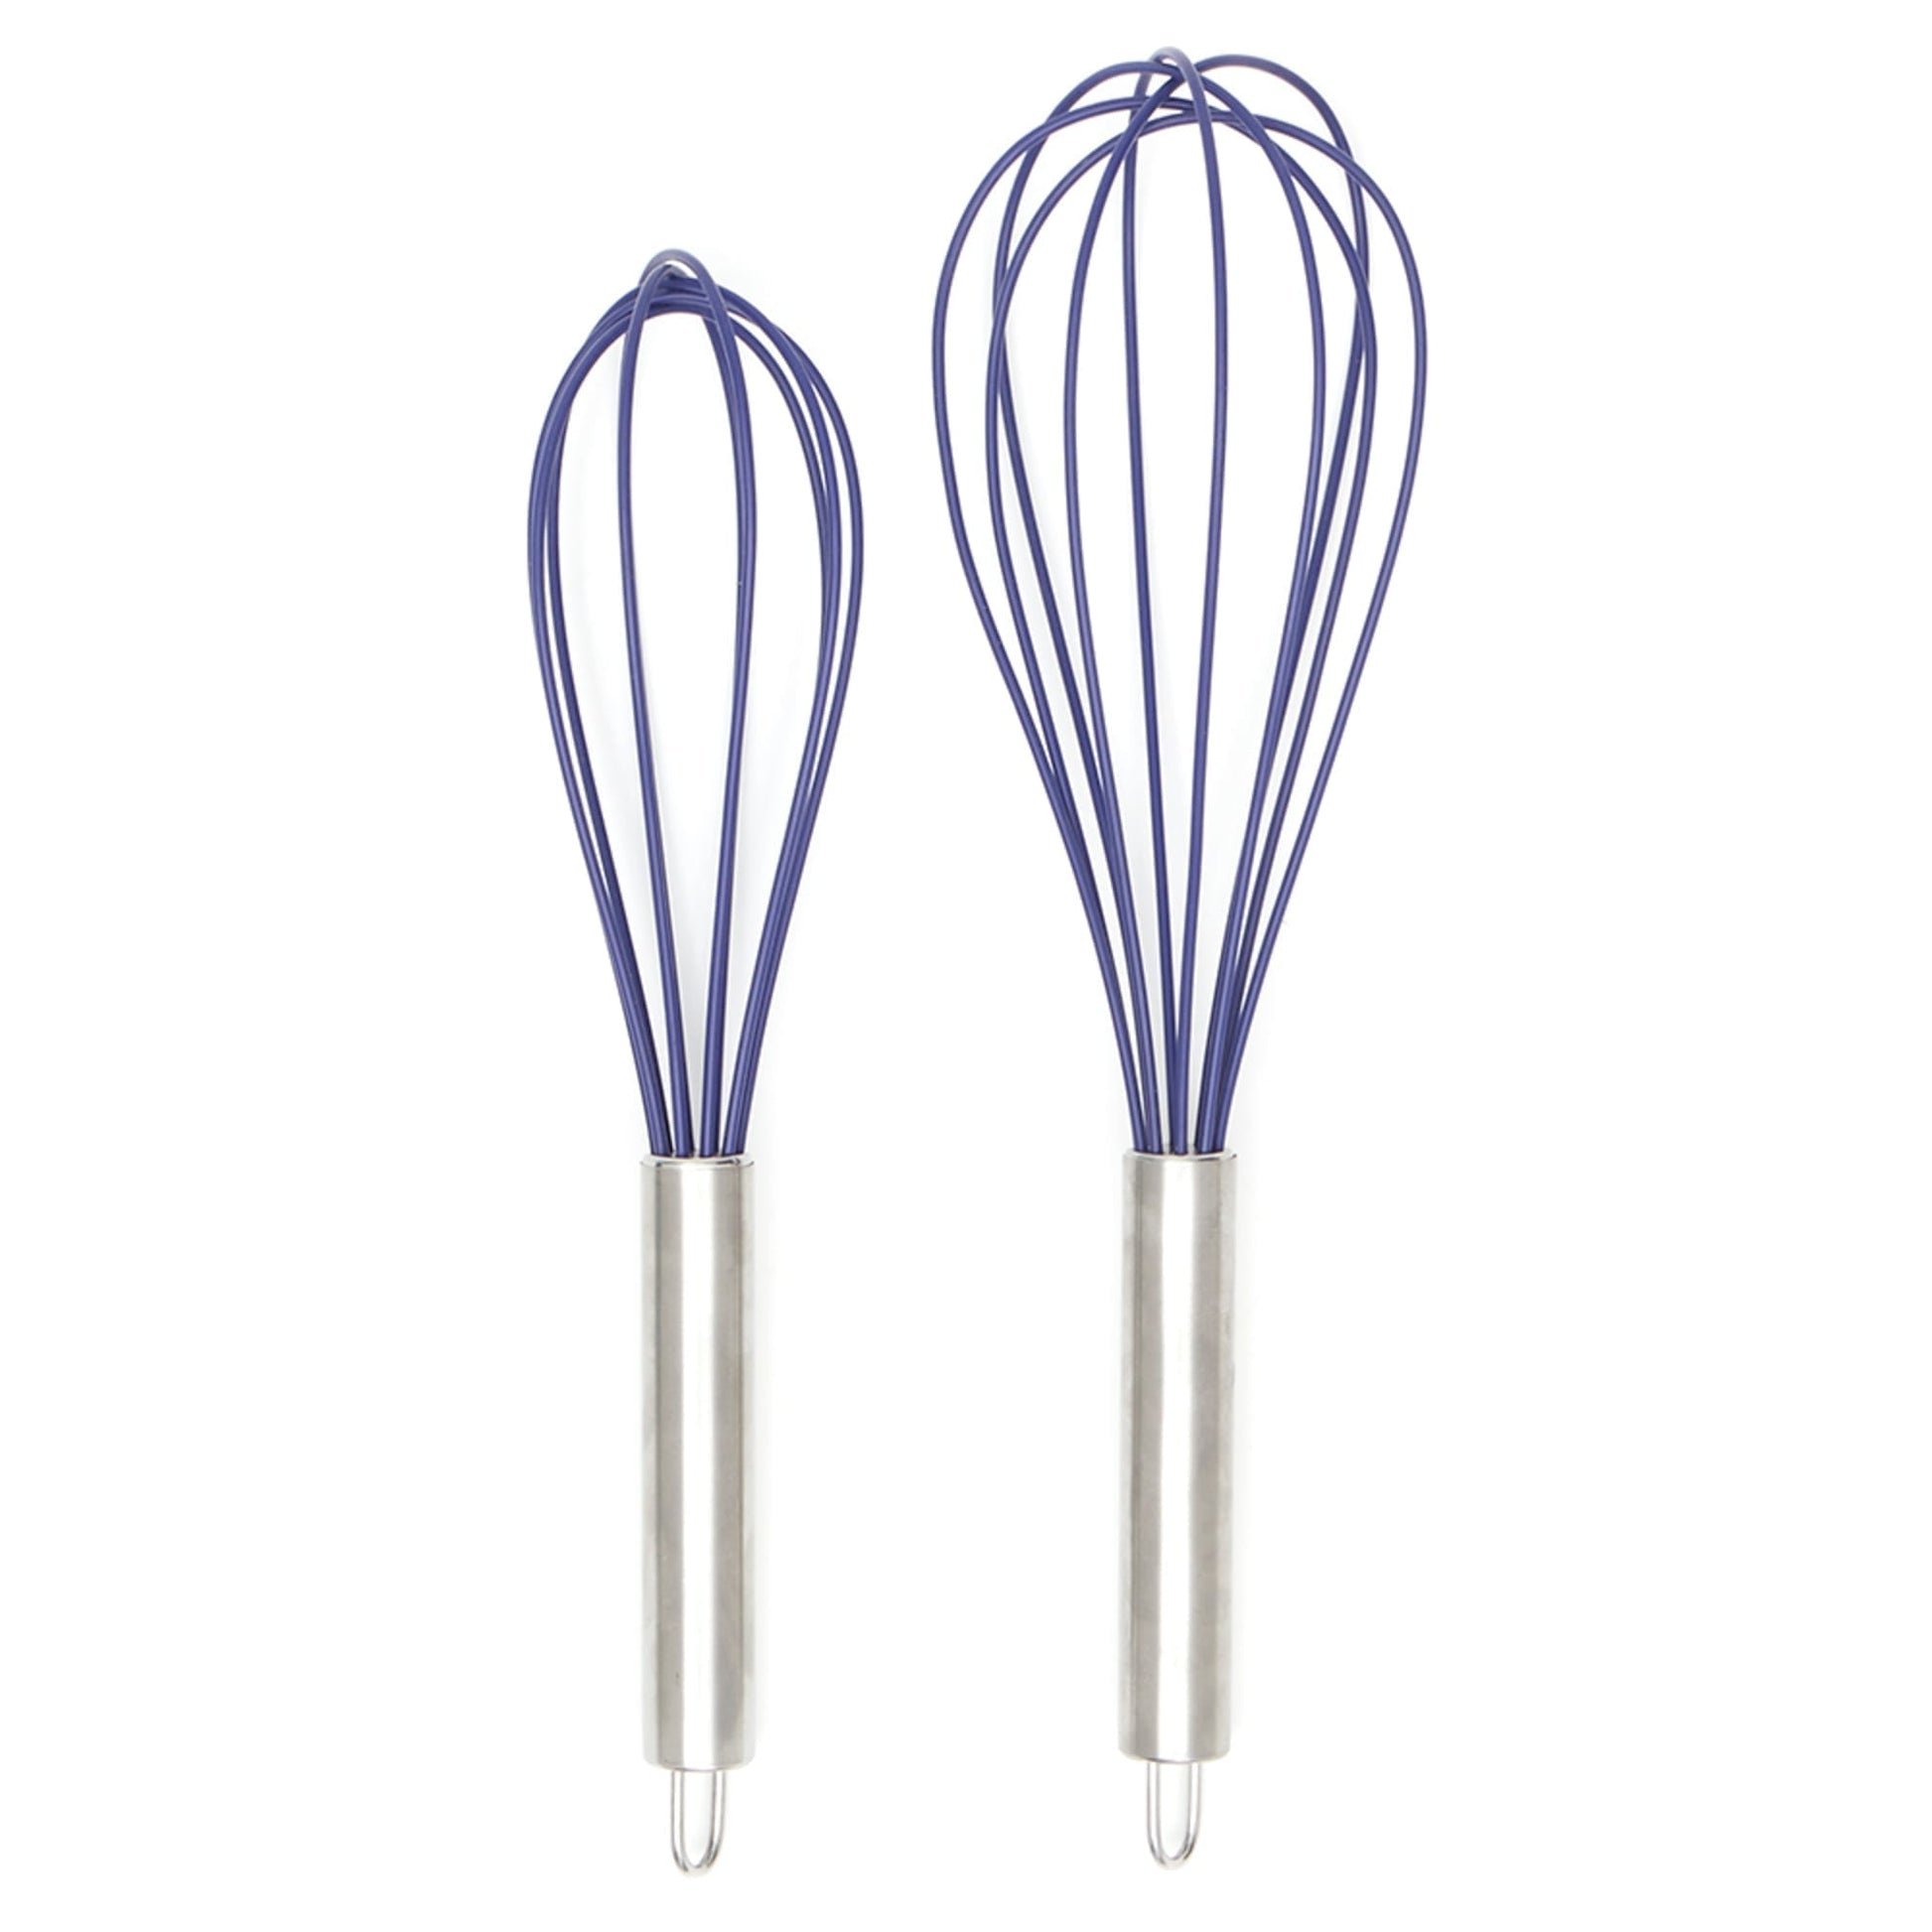 Wired Whisk silicone whisk set of 3 - stainless steel & silicone non-stick  coating - colored balloon egg beater for blending, whisking, b